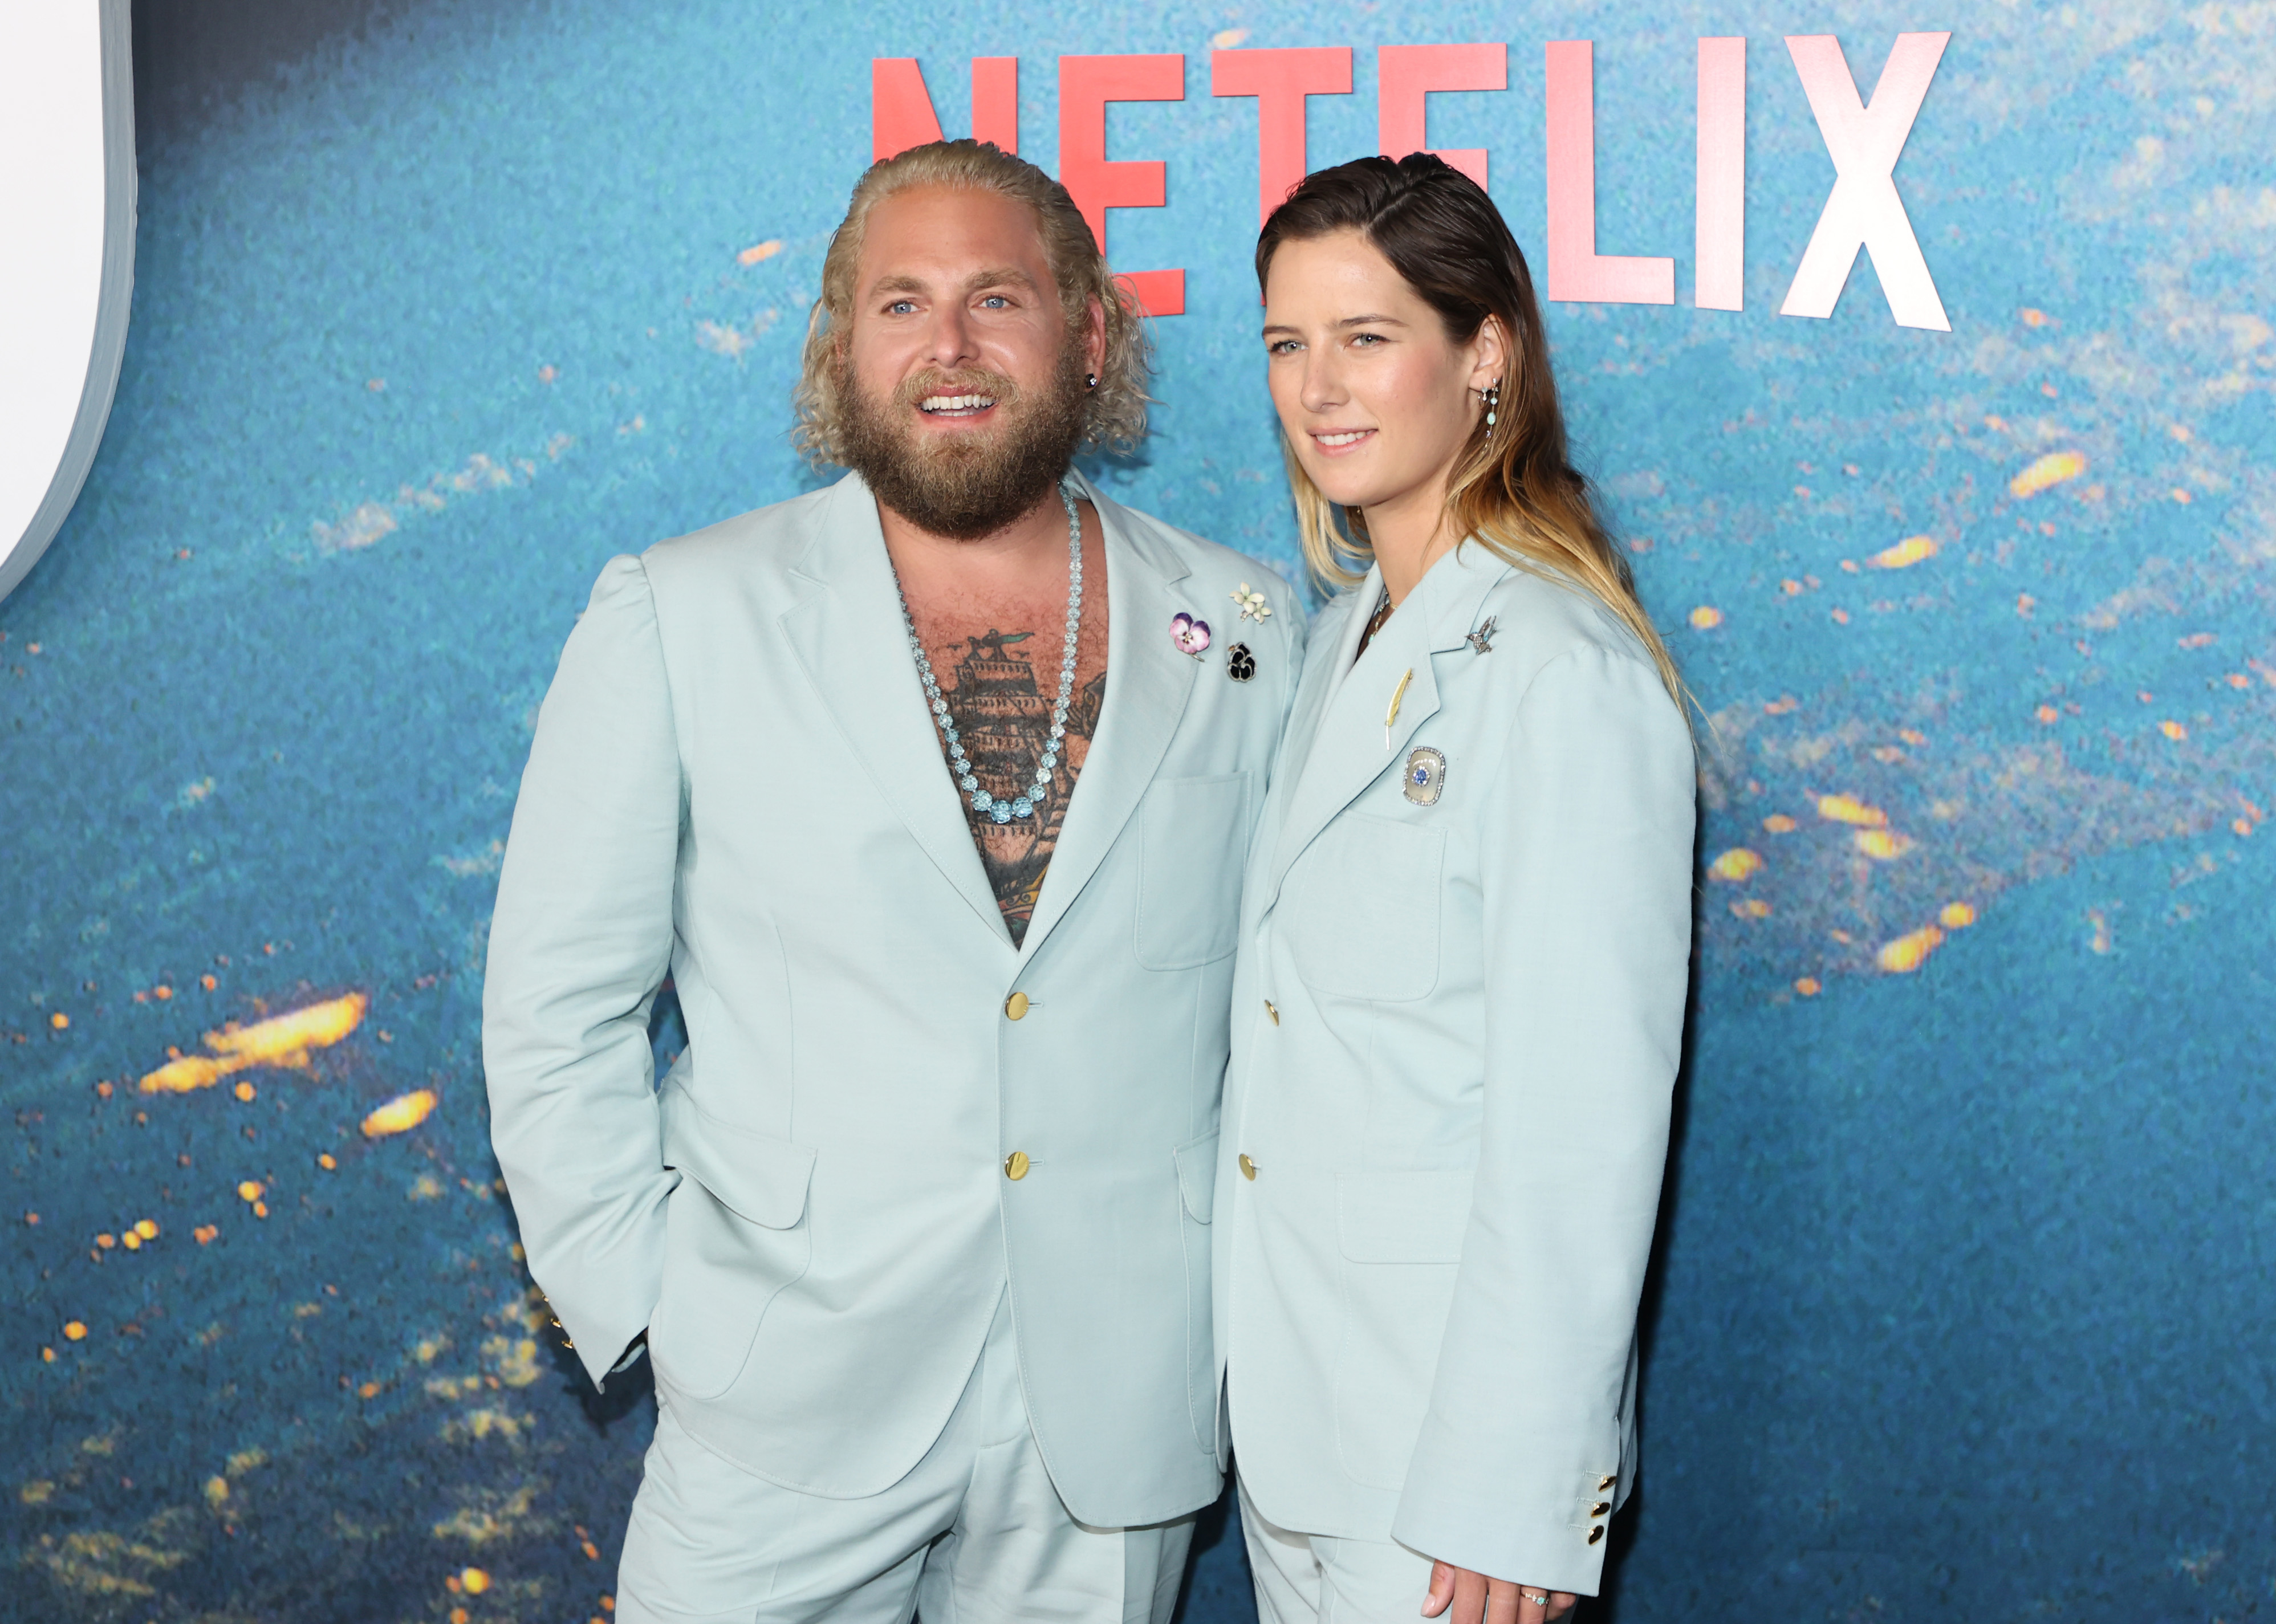 Jonah and Sarah at a media event in matching suits